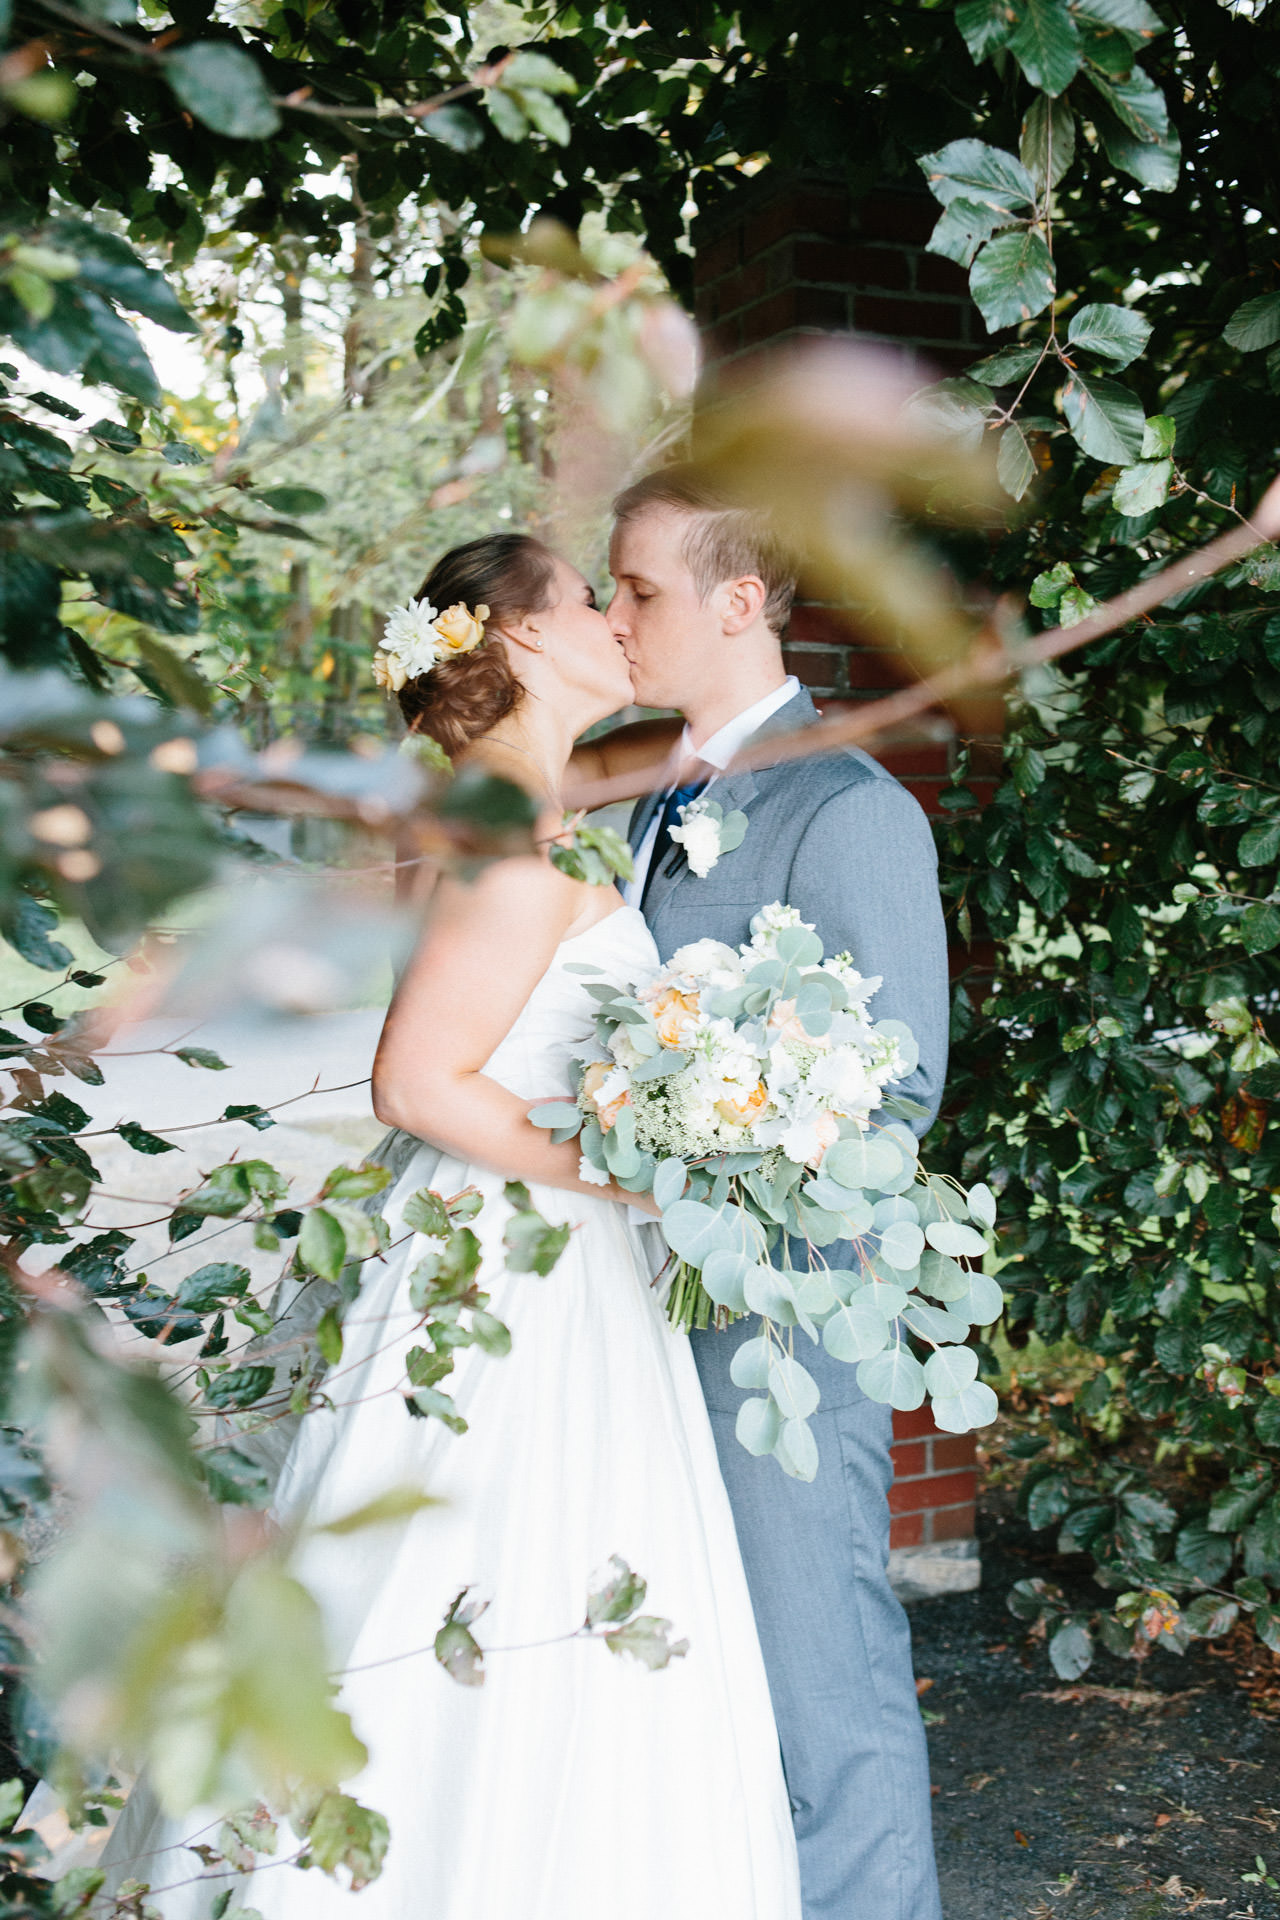 Husband and wife kissing in a garden